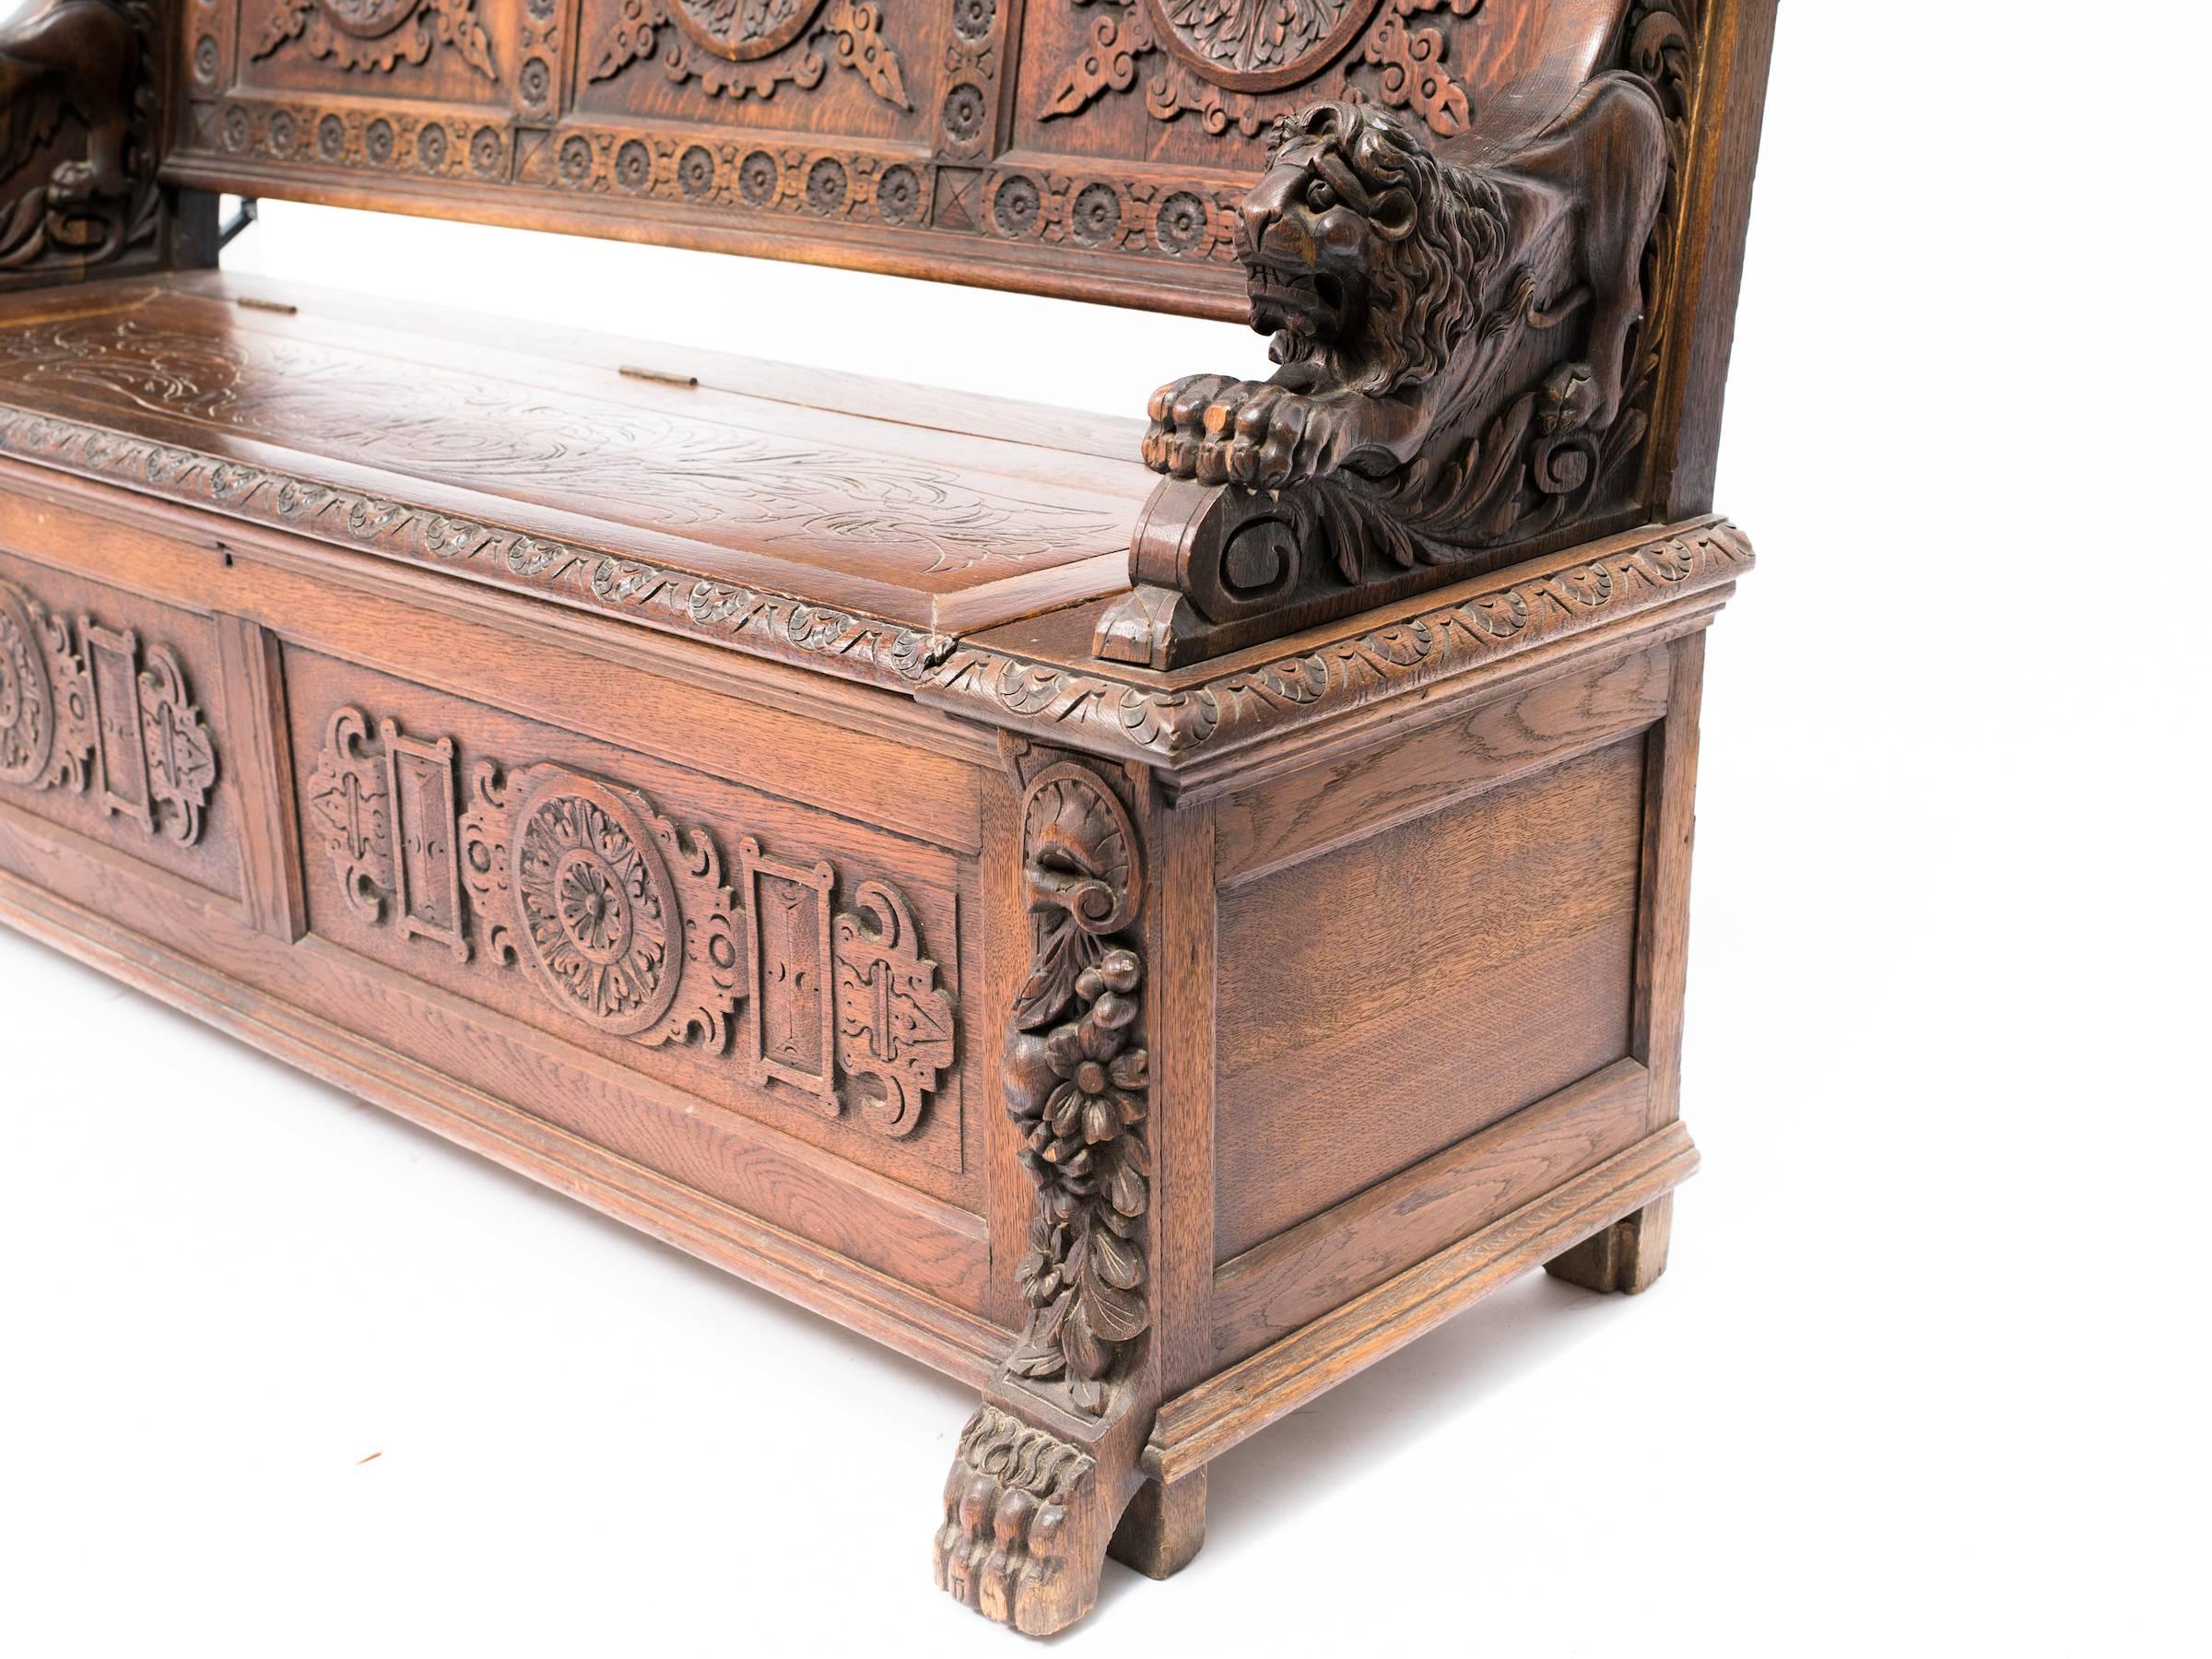 19th century ornately carved bench with storage area.